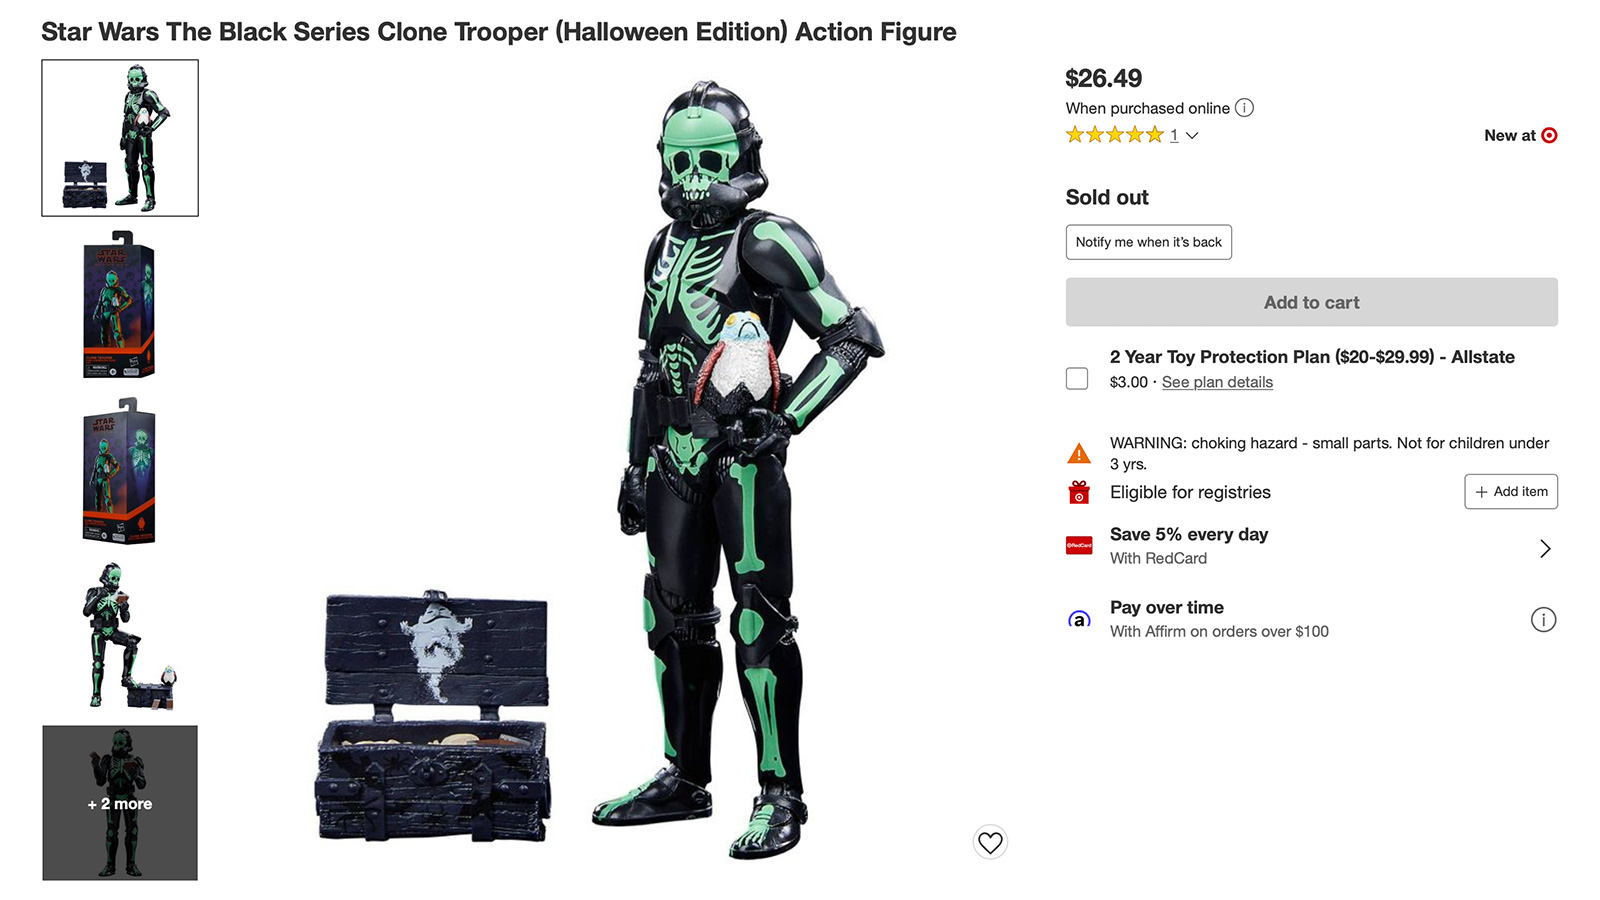 Target Exclusive TBS 6-Inch Trooper (Halloween Edition) Product Page Live - No Preorders Yet